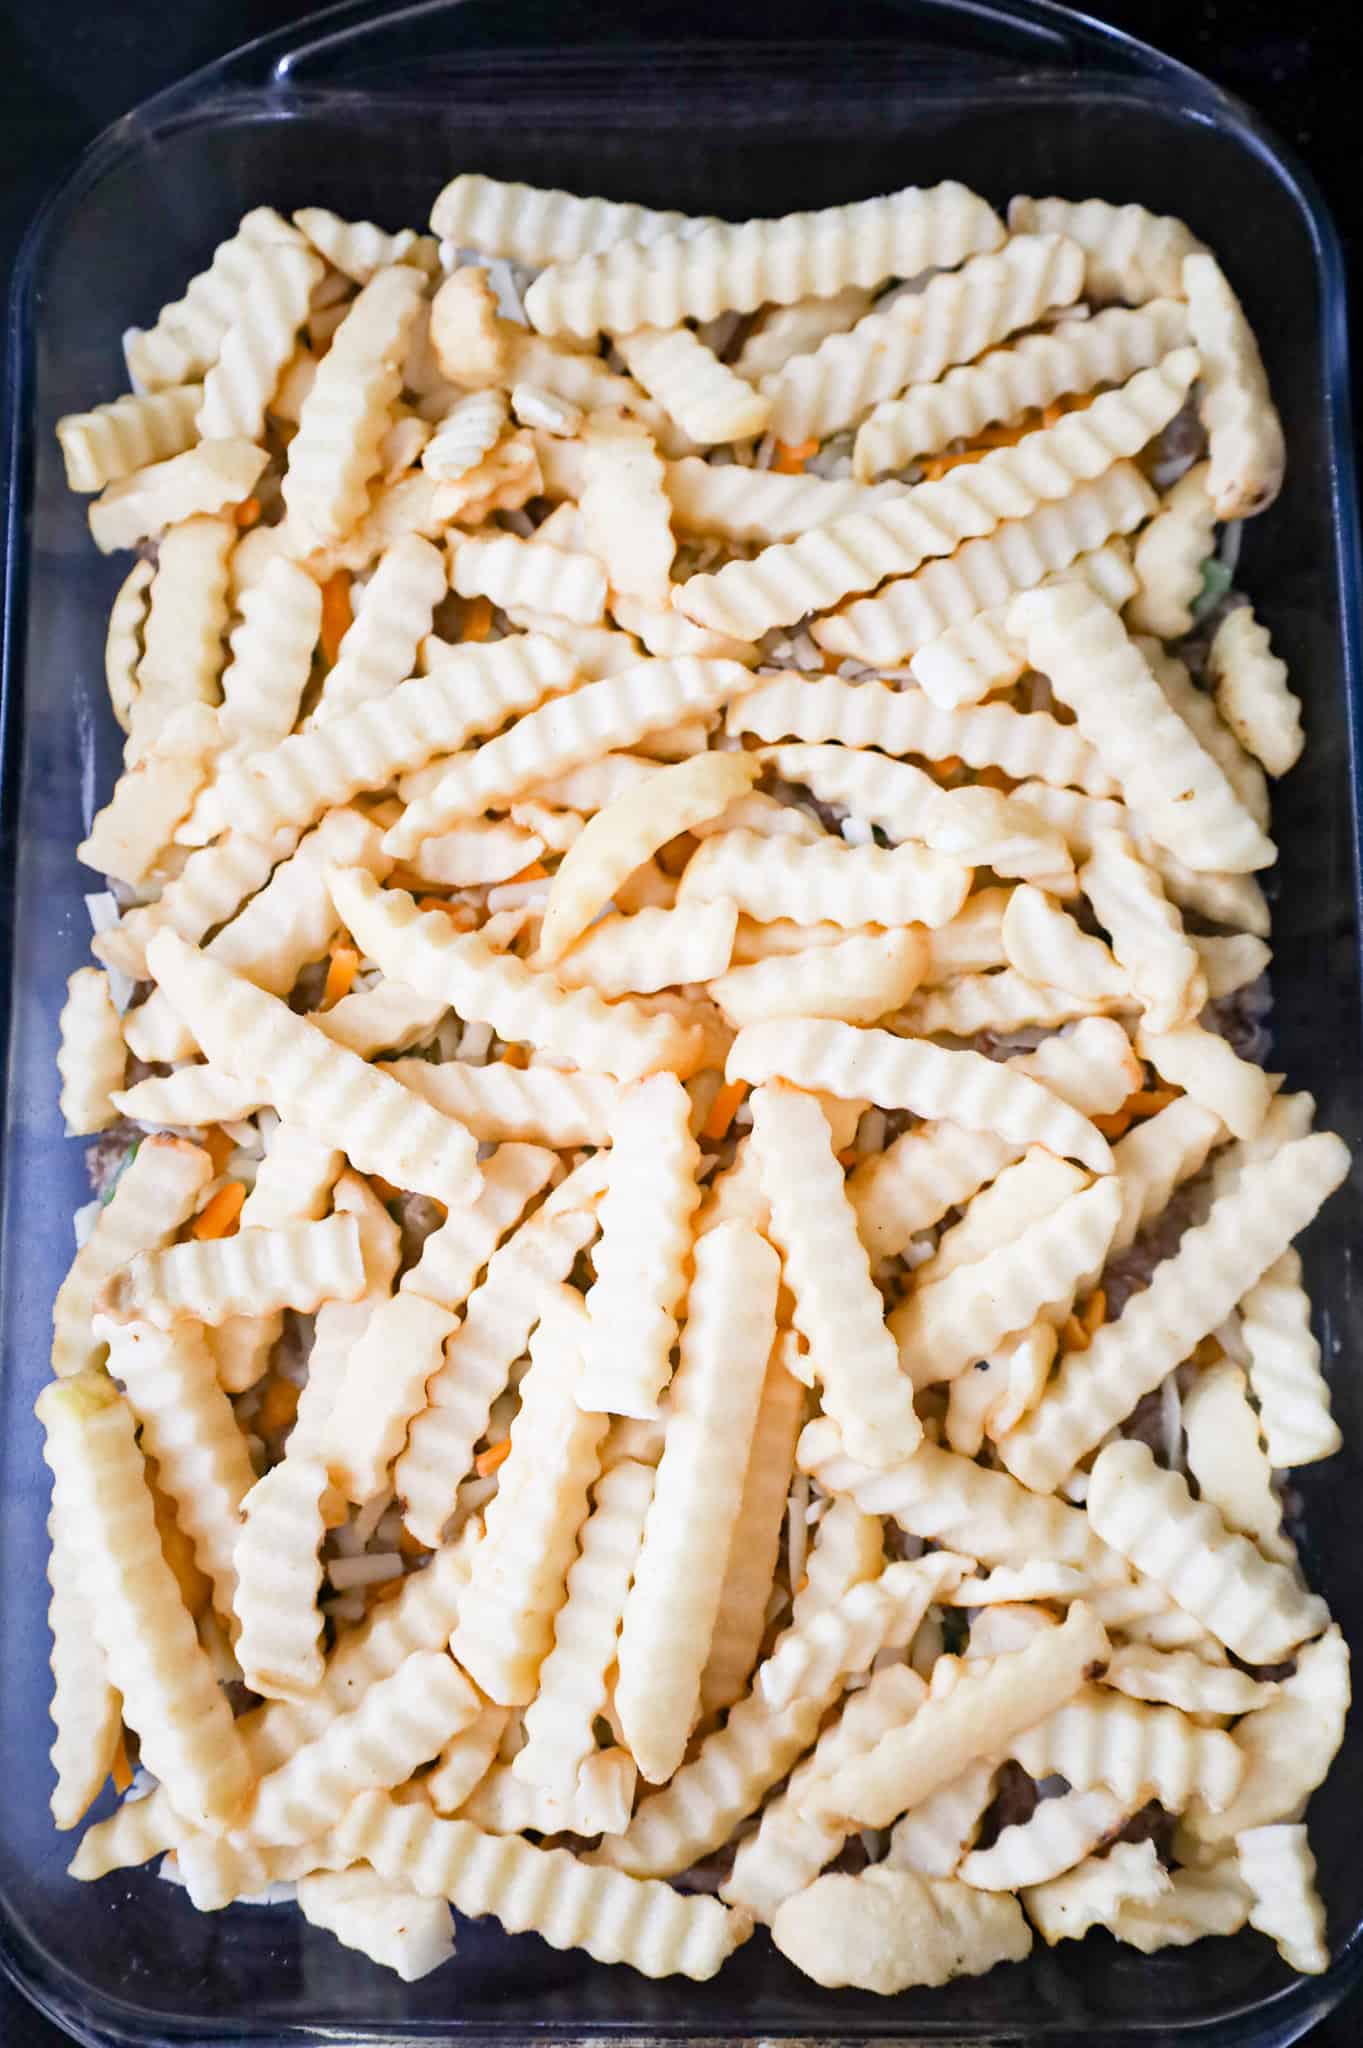 frozen crinkle cut fries on top of ground beef mixture in a baking dish